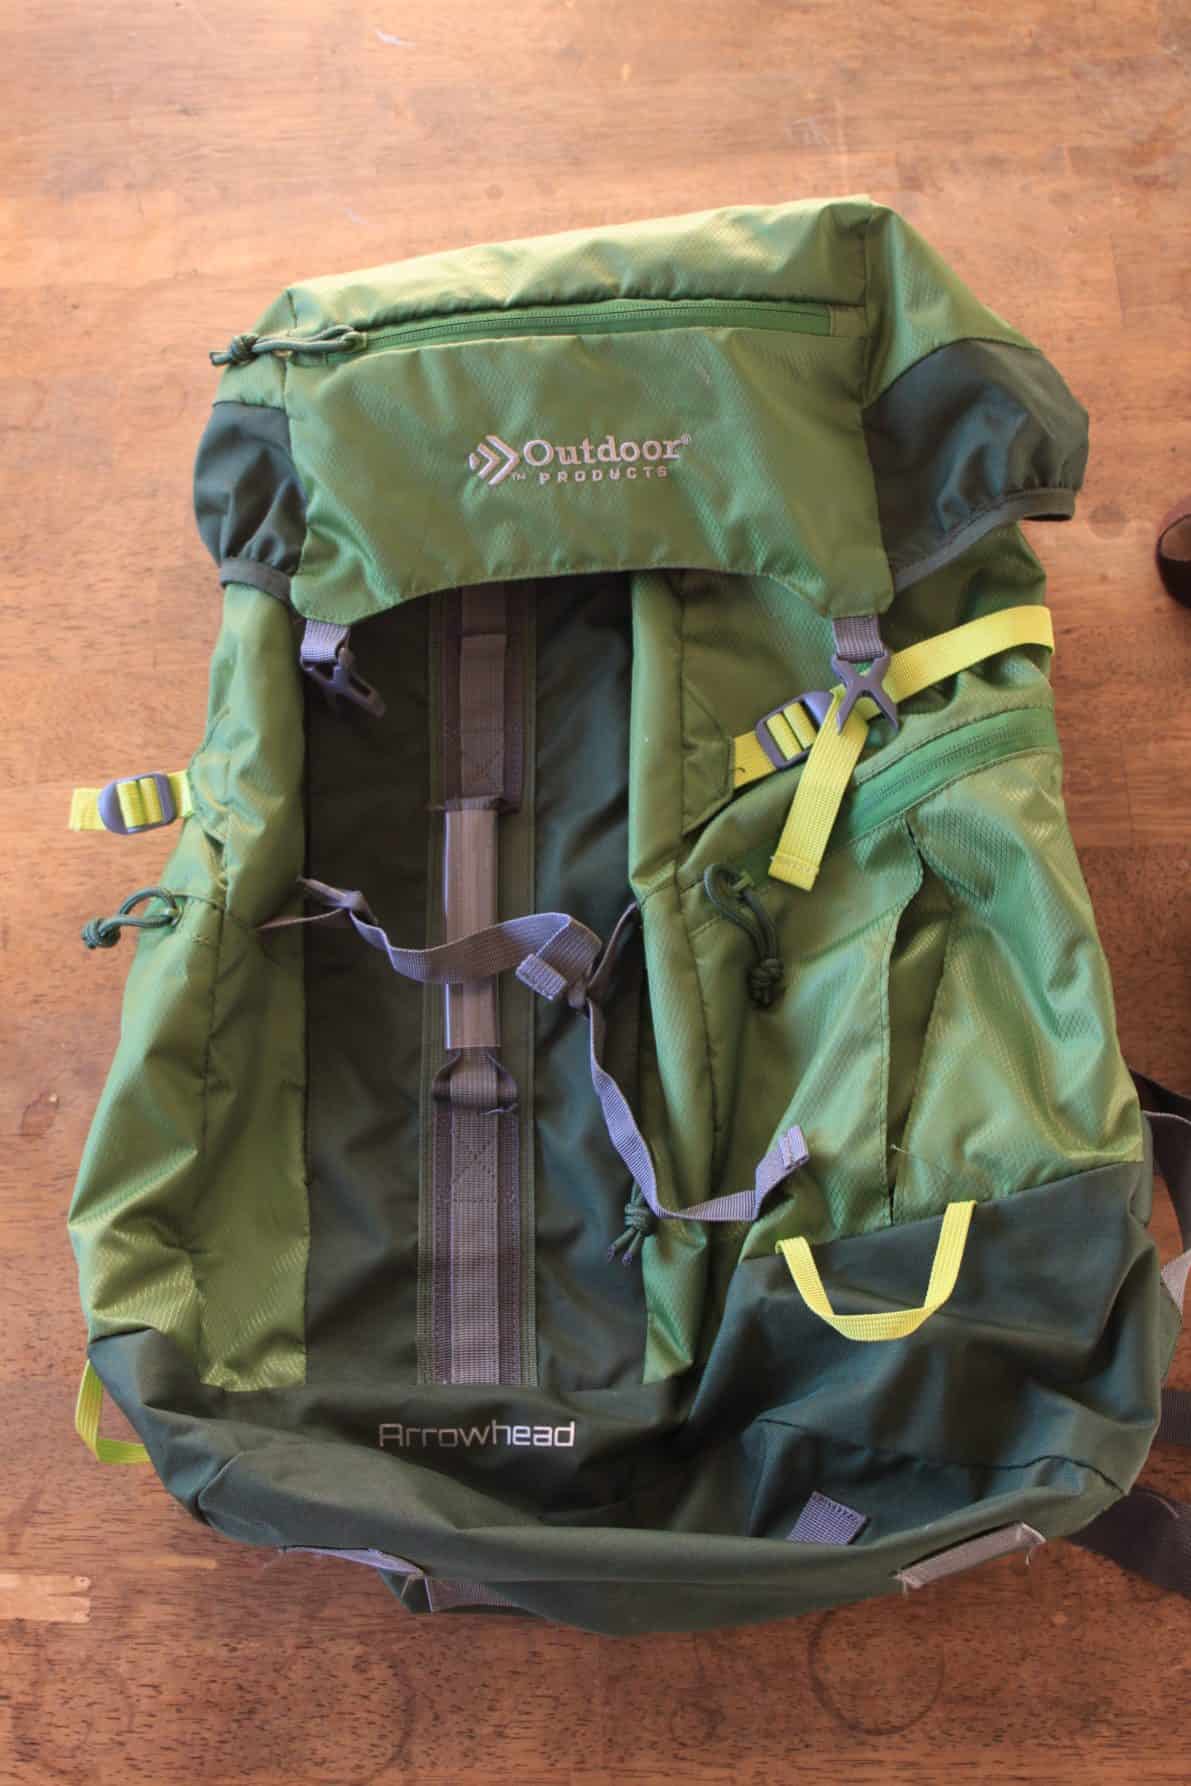 Green backpacking bag to travel the world with a backpack.